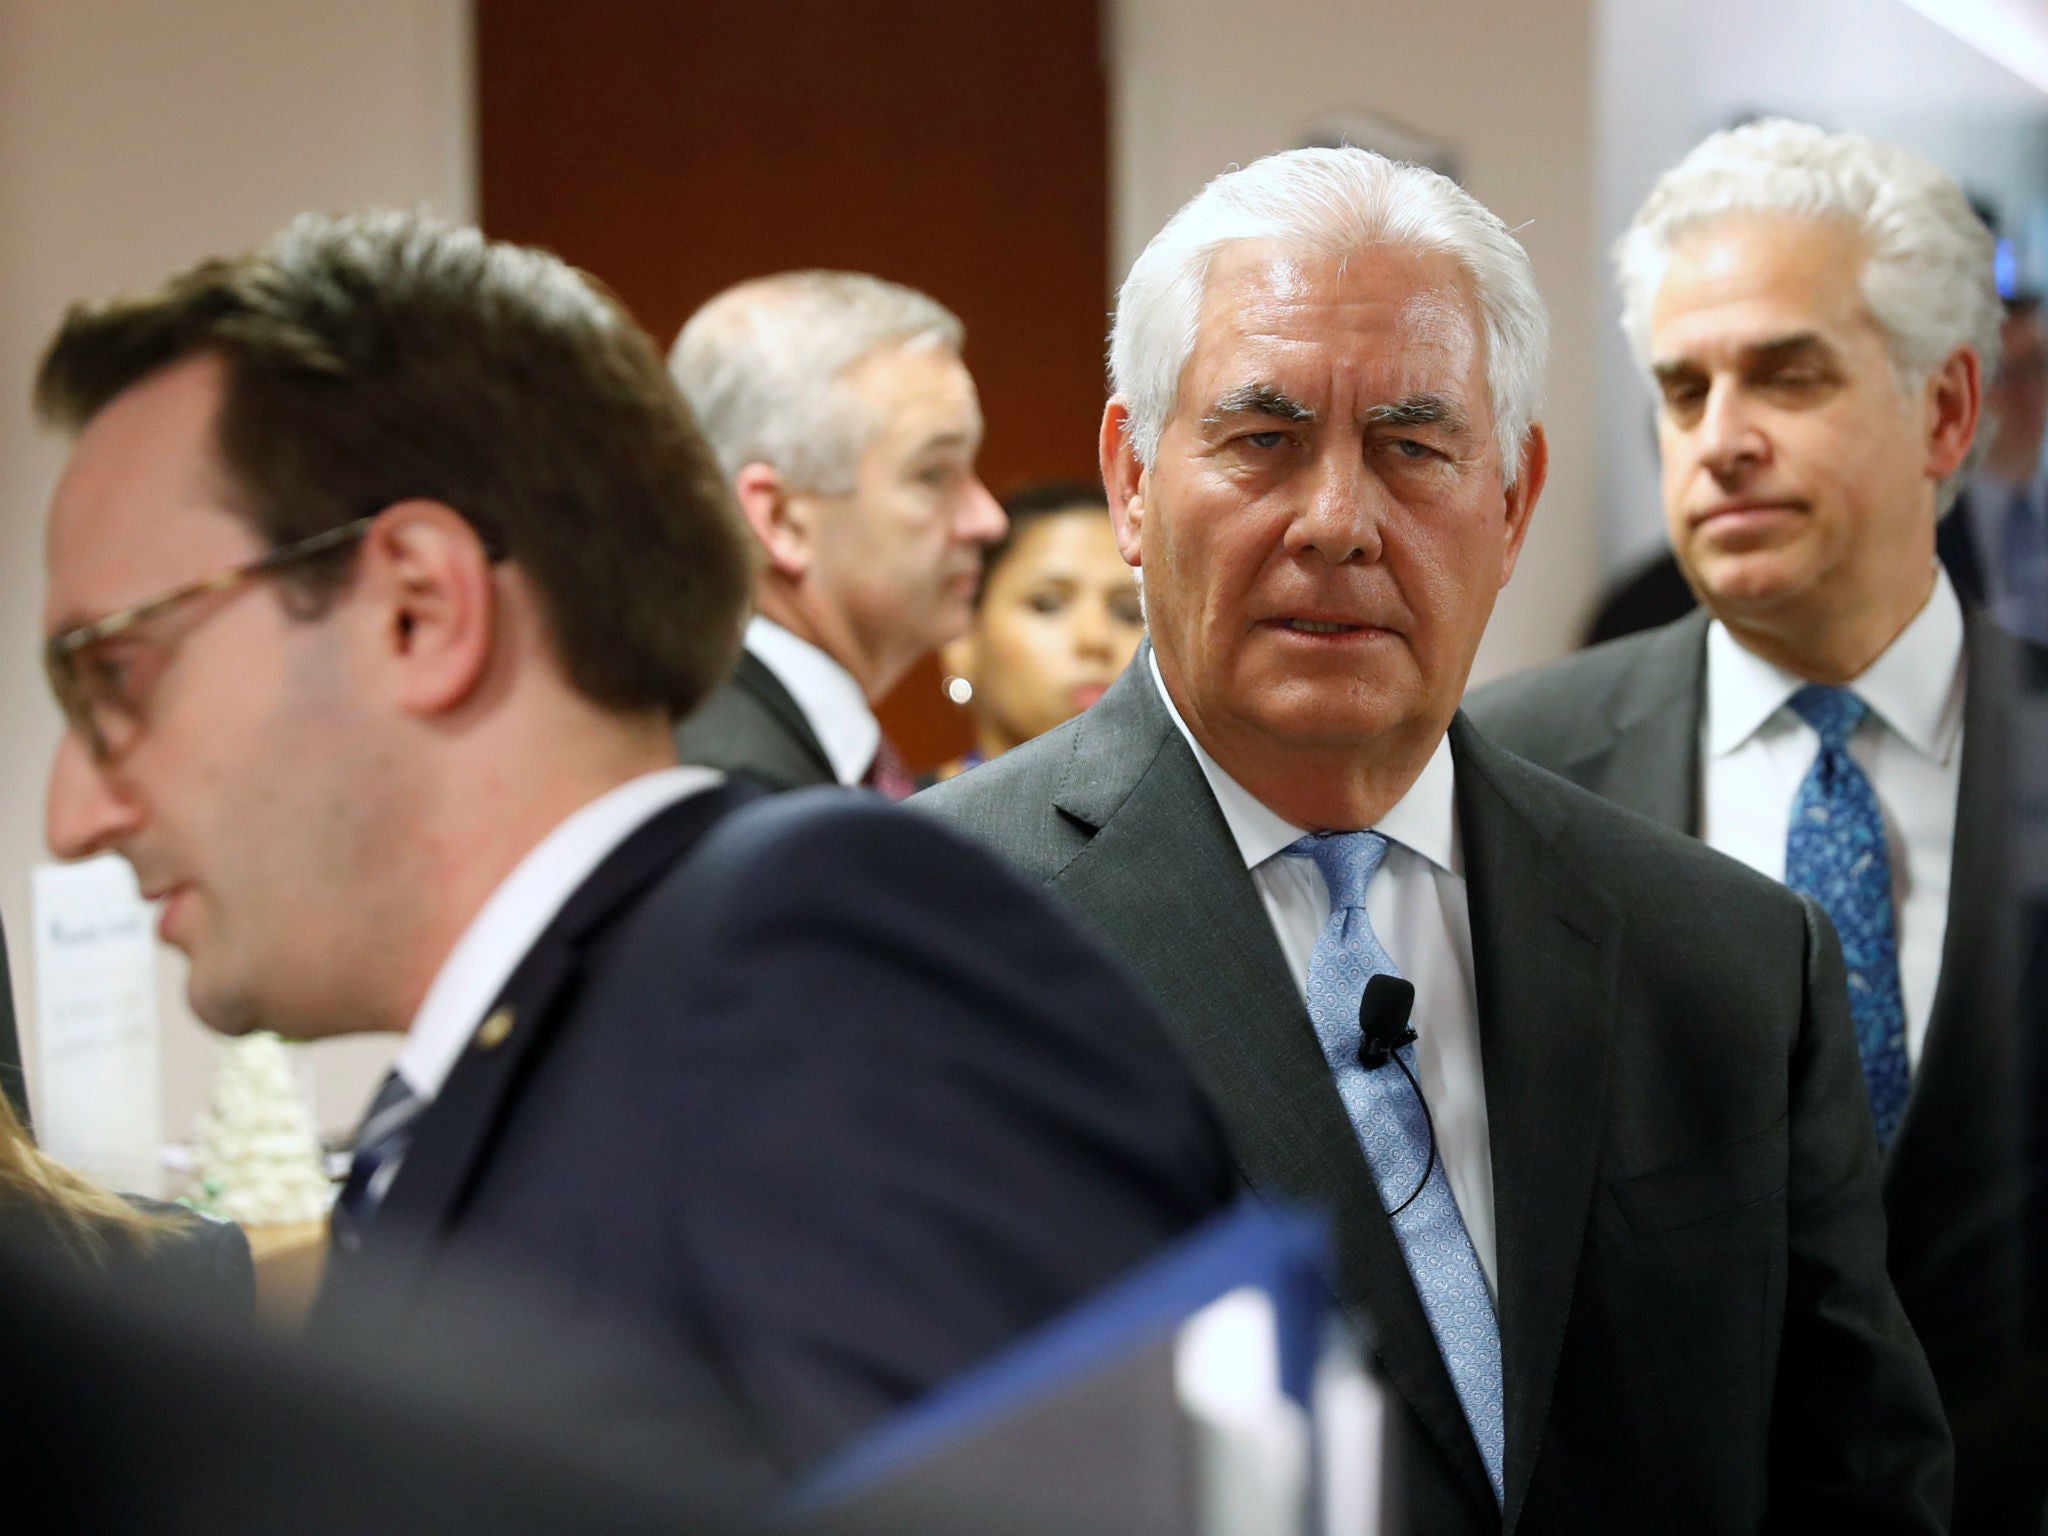 Rex Tillerson said America was ready for talks with North Korea, but other Trump officials aren't so sure